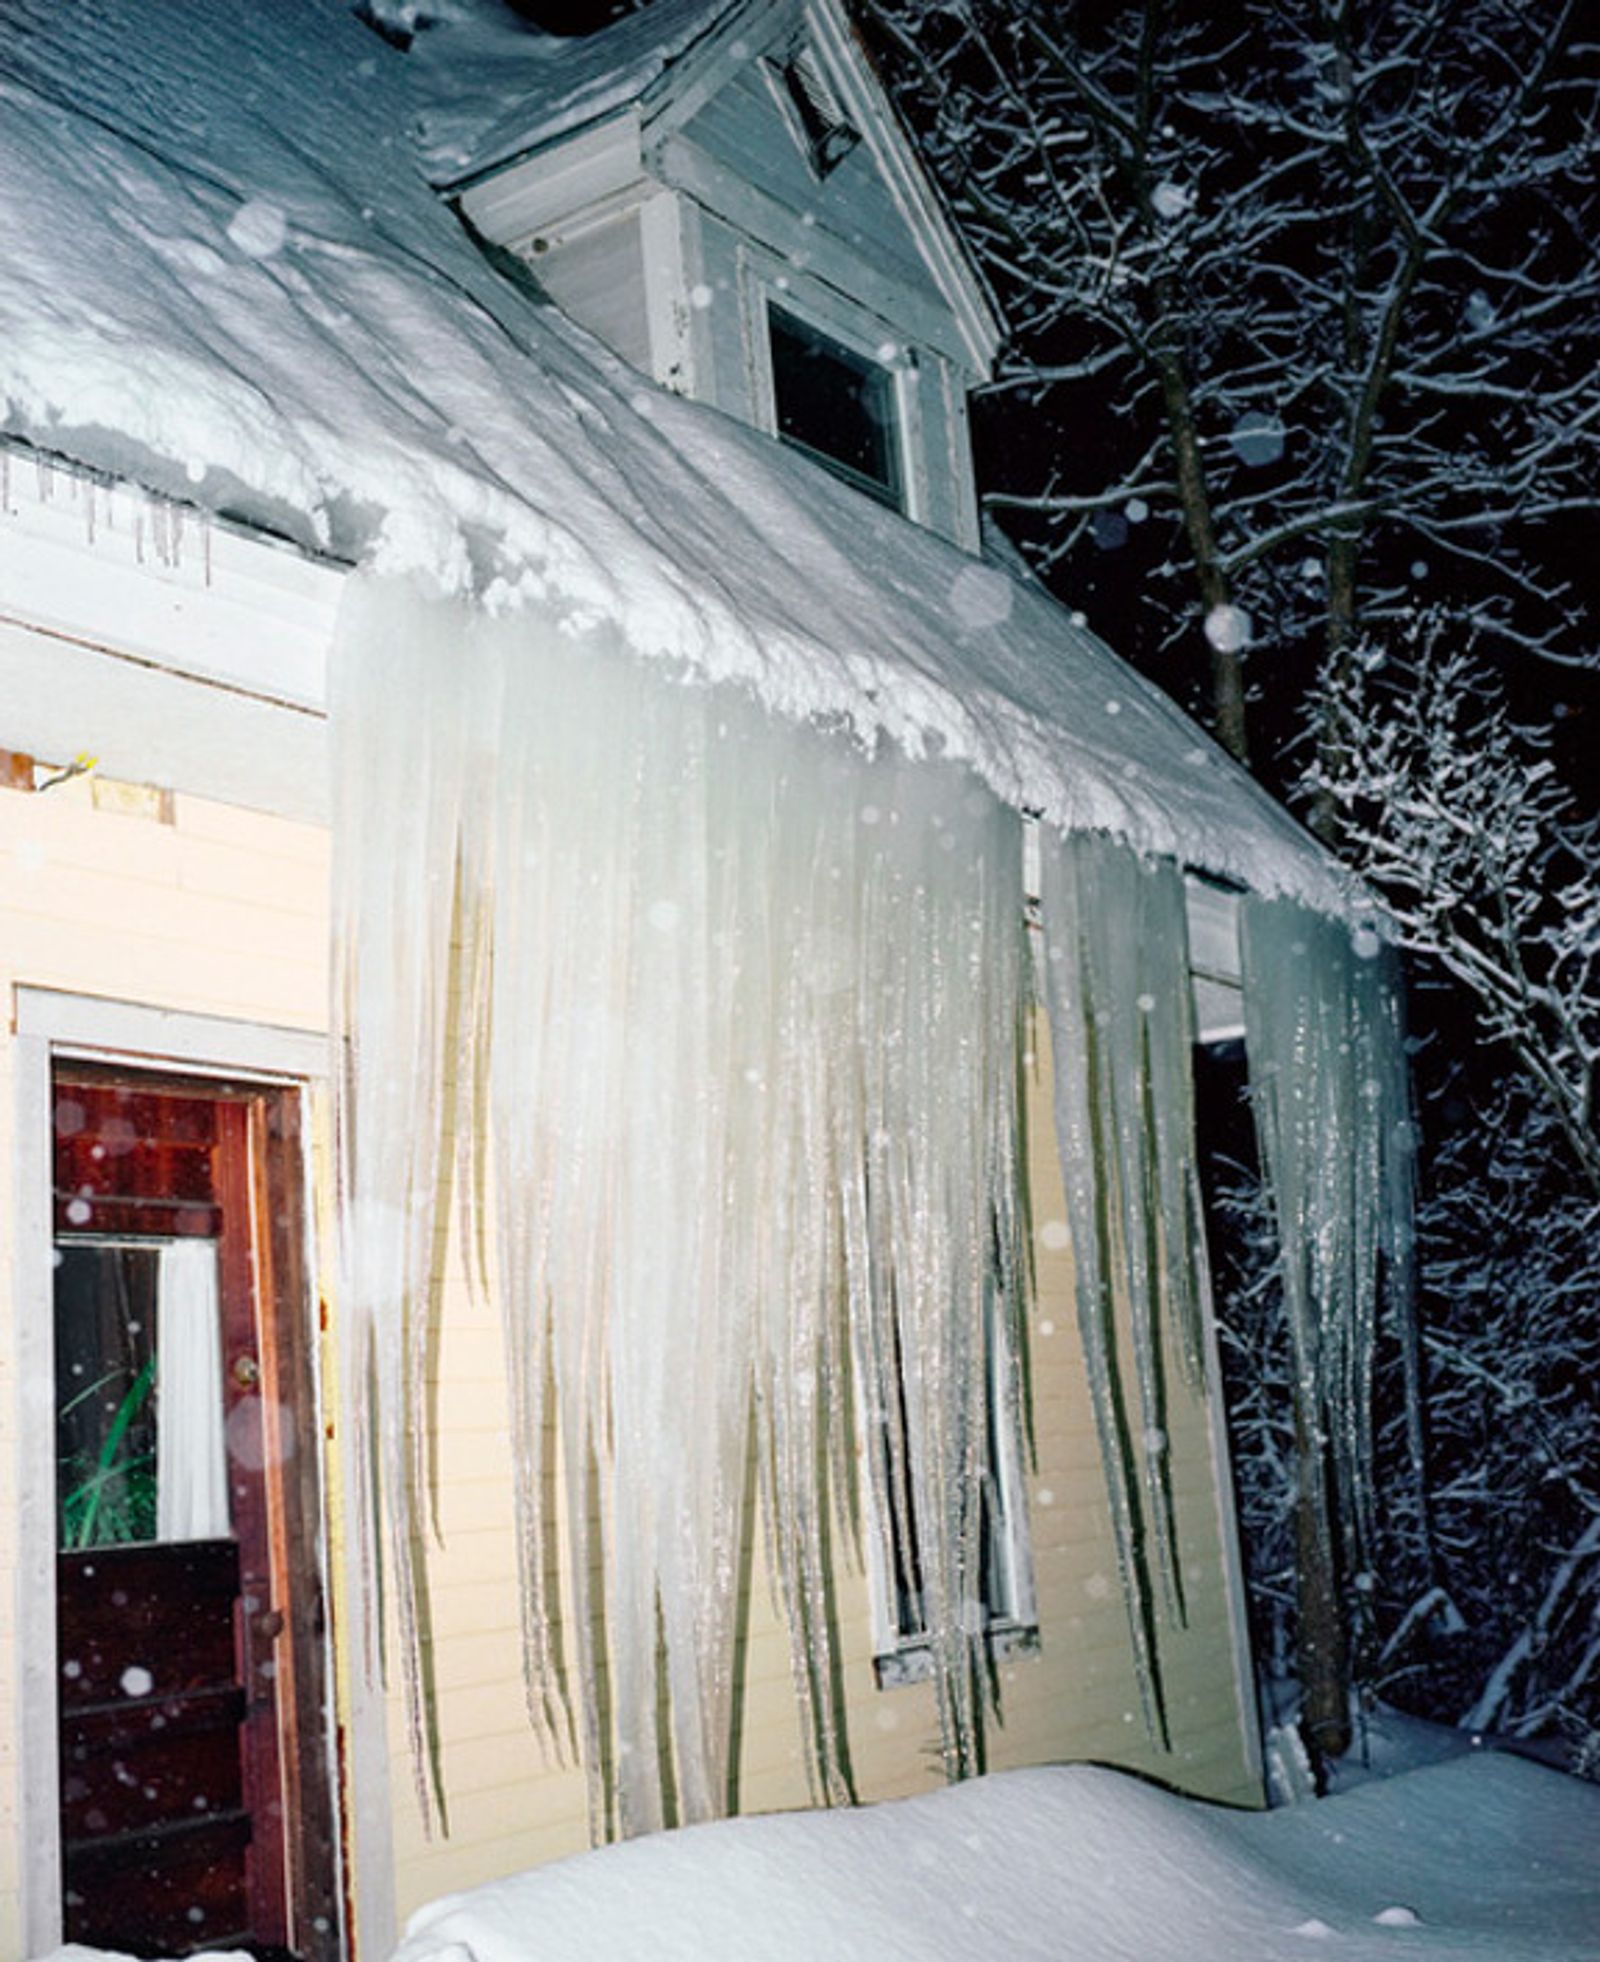 © Nathanael Turner - Icicles on the home I grew up in